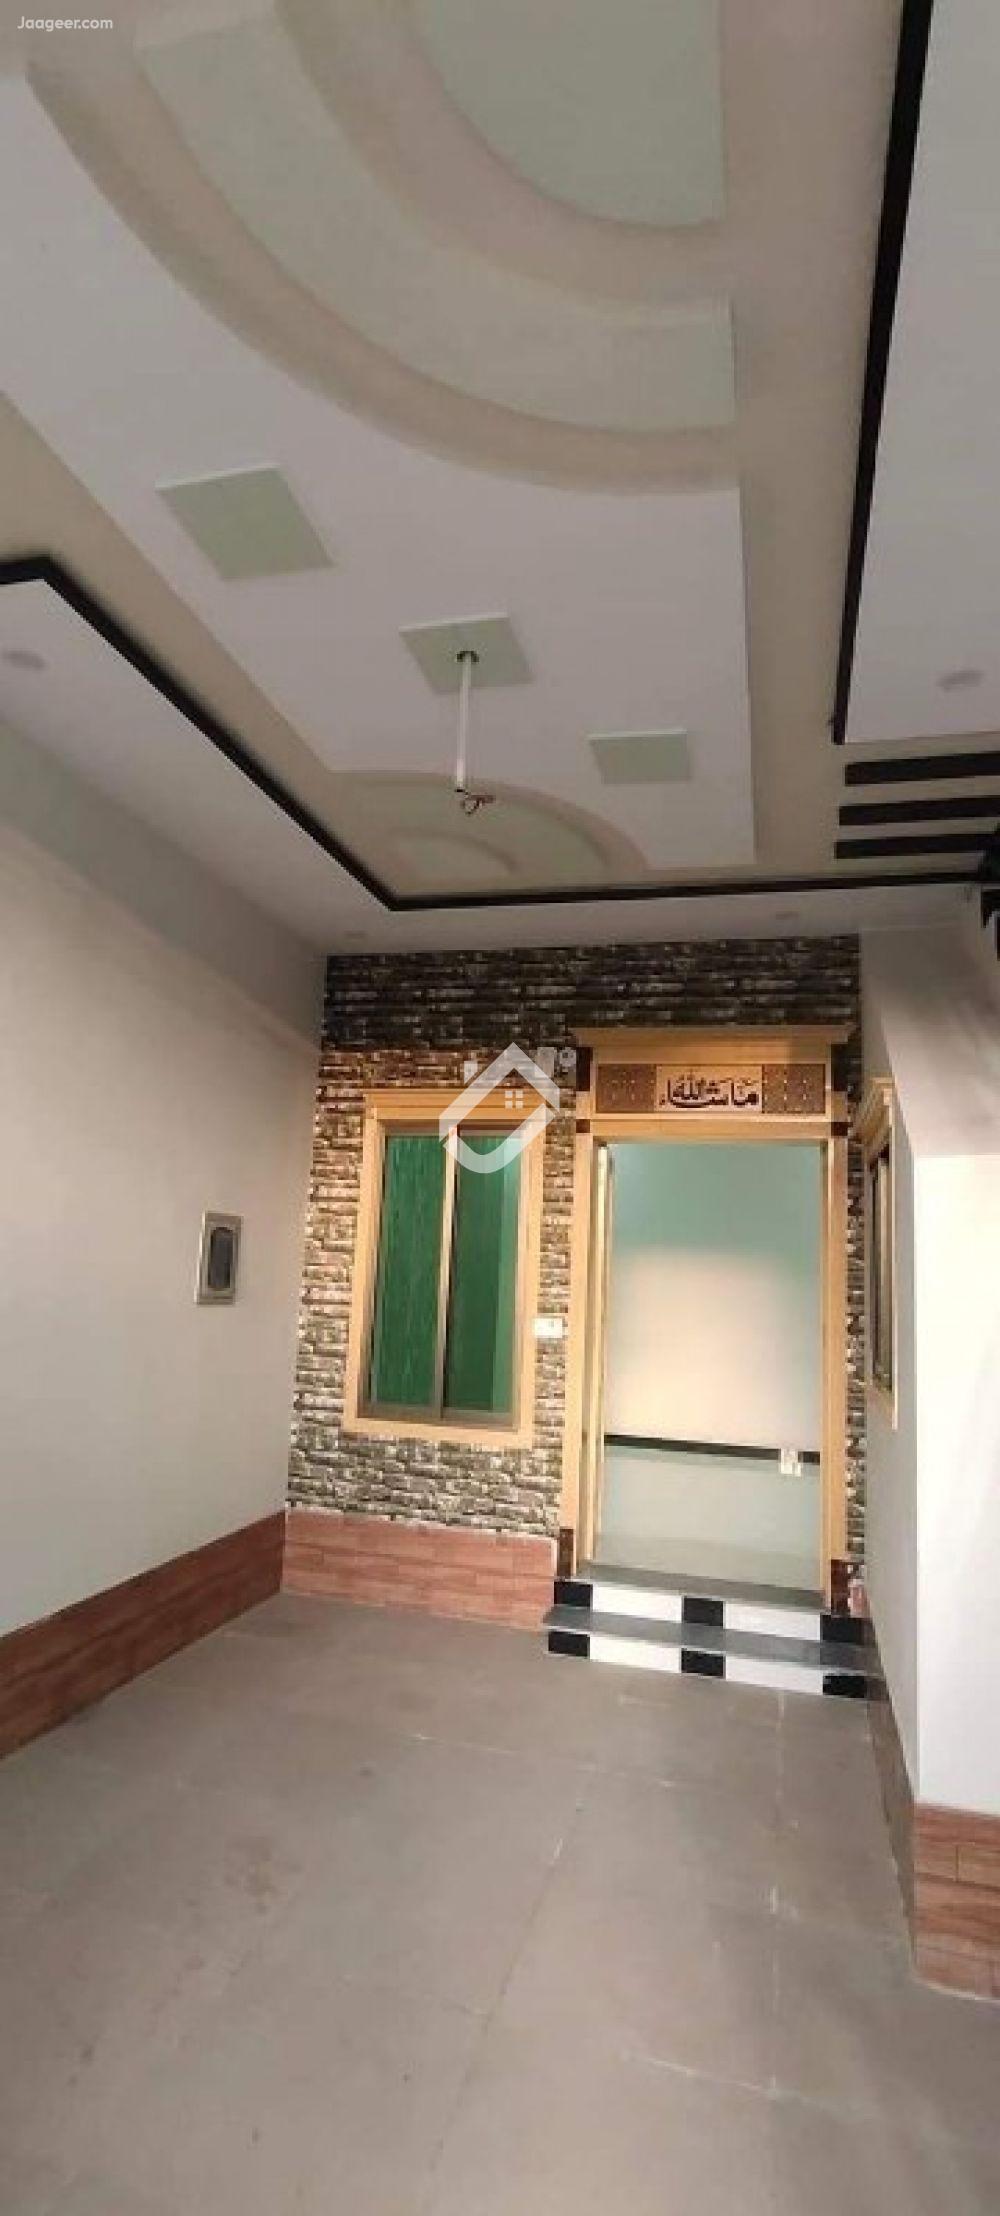 View  3 Marla Double Storey House Is For Sale In Alif Town in Alif Town, Sheikhupura